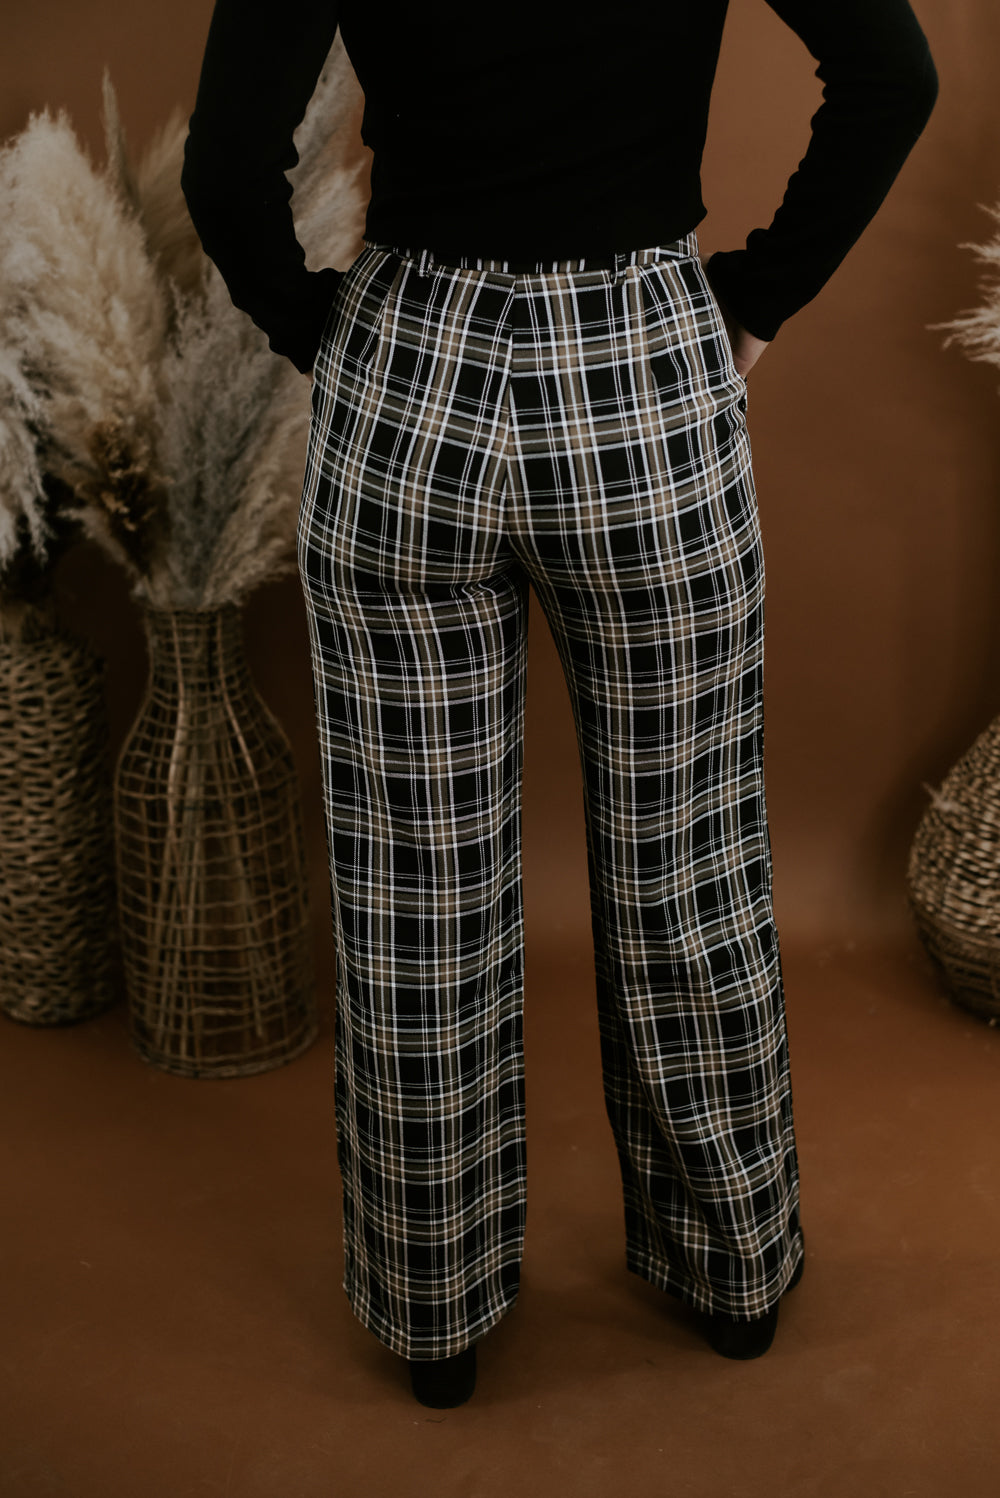 Trendy check pants. Styling Patterned Pants #shorts - YouTube | Mens  outfits, Best mens fashion, Fall fashion jeans